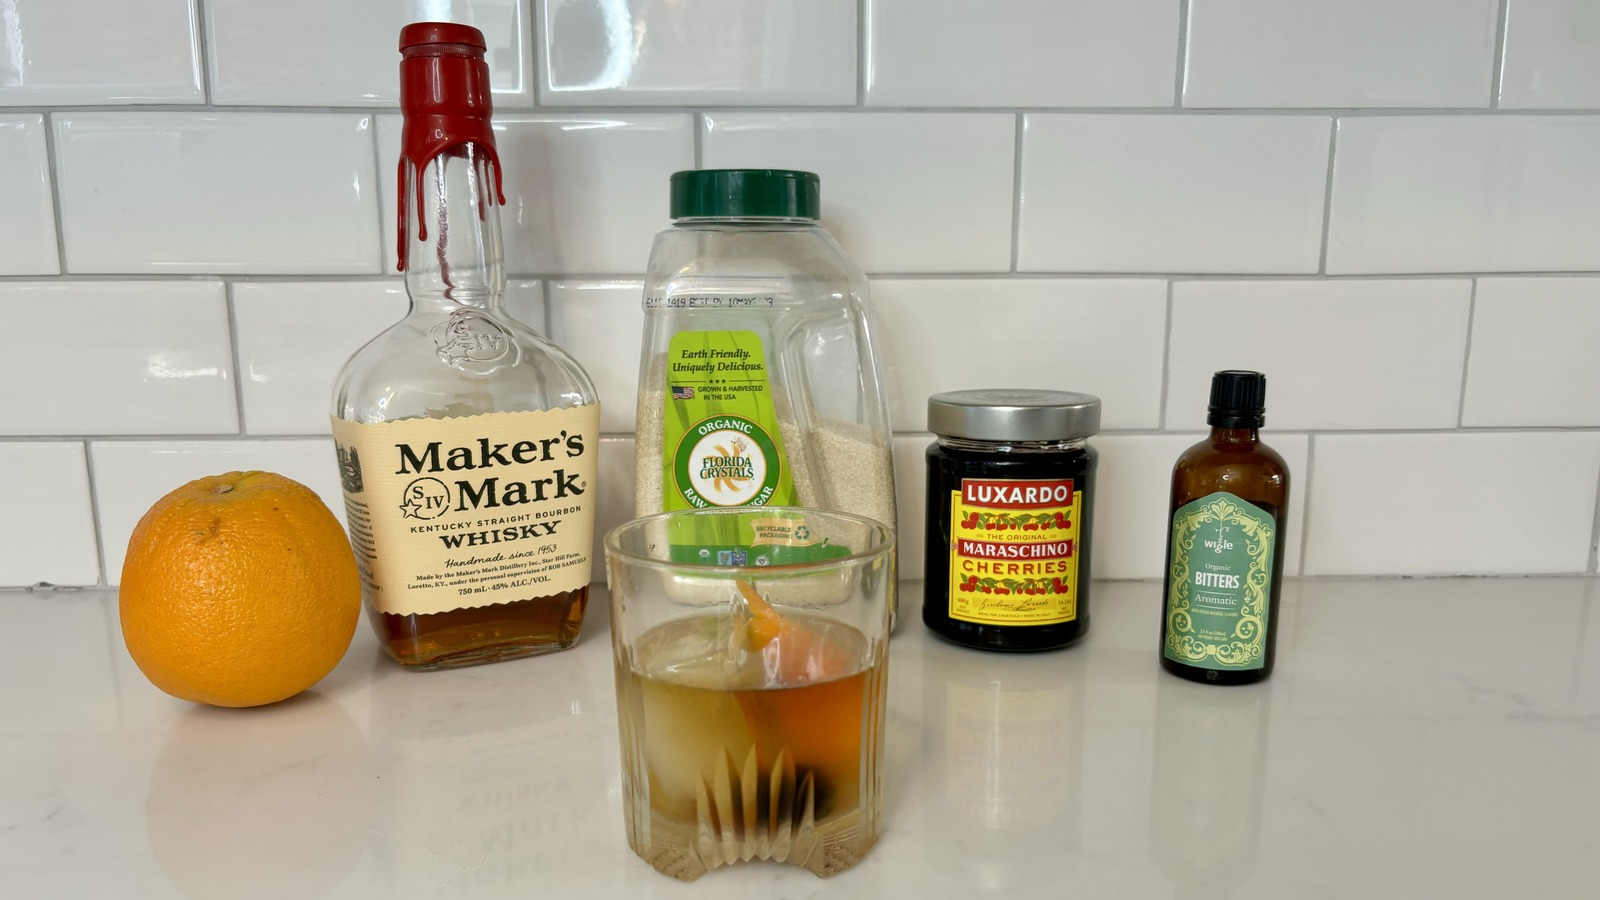 How To Make The Best Old-Fashioned You've Ever Had